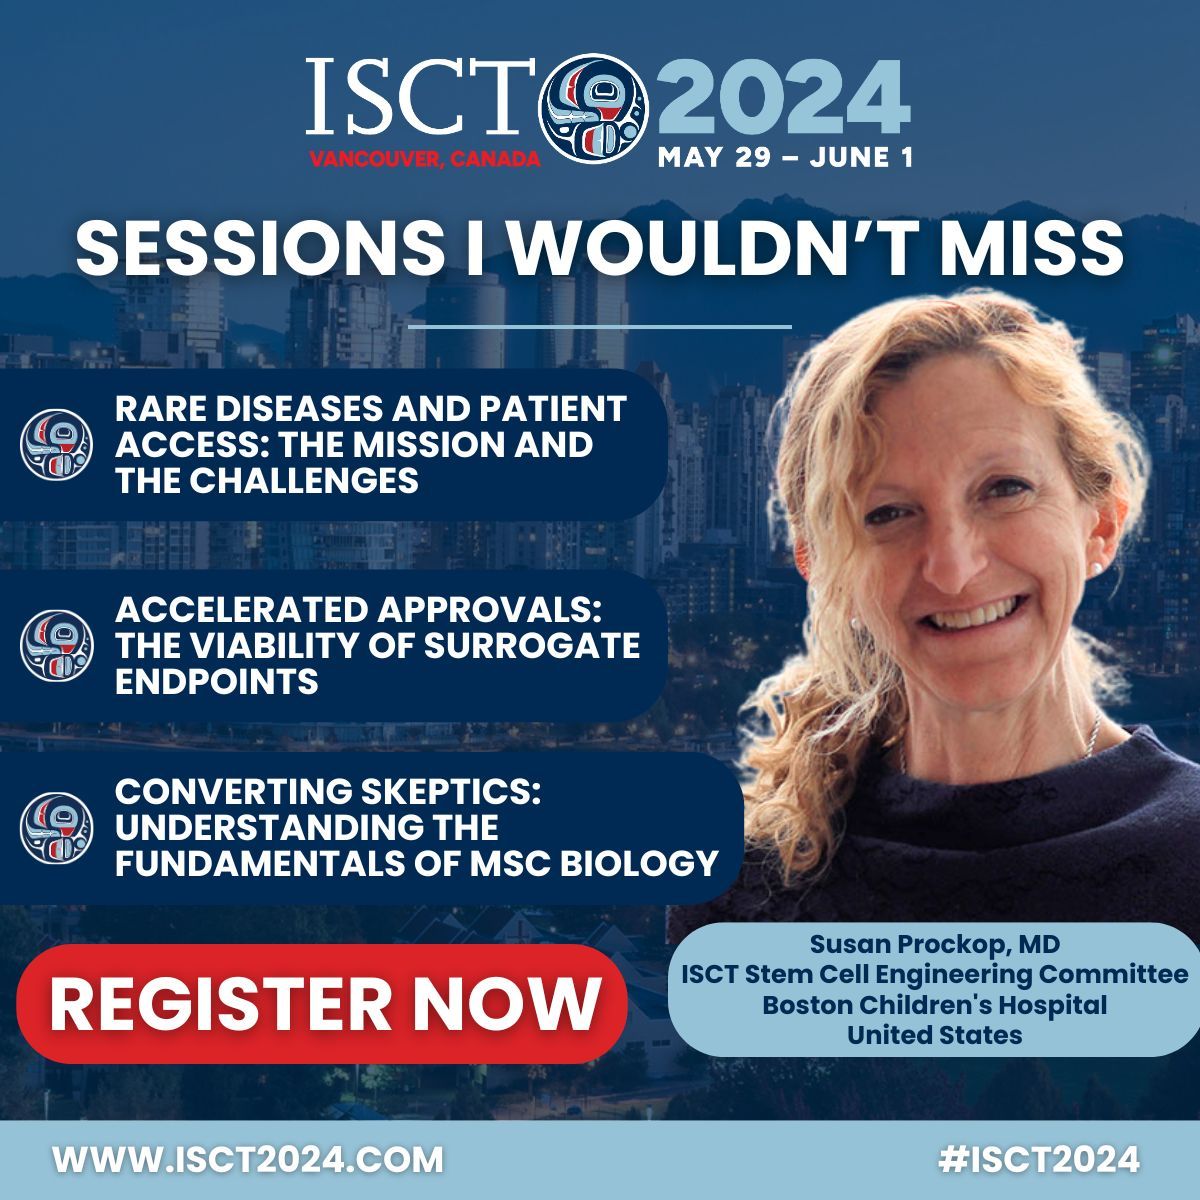 ISCT 2024 is just around the corner. Register now to secure your place alongside 2500 delegates from across the globe. buff.ly/484XMFT